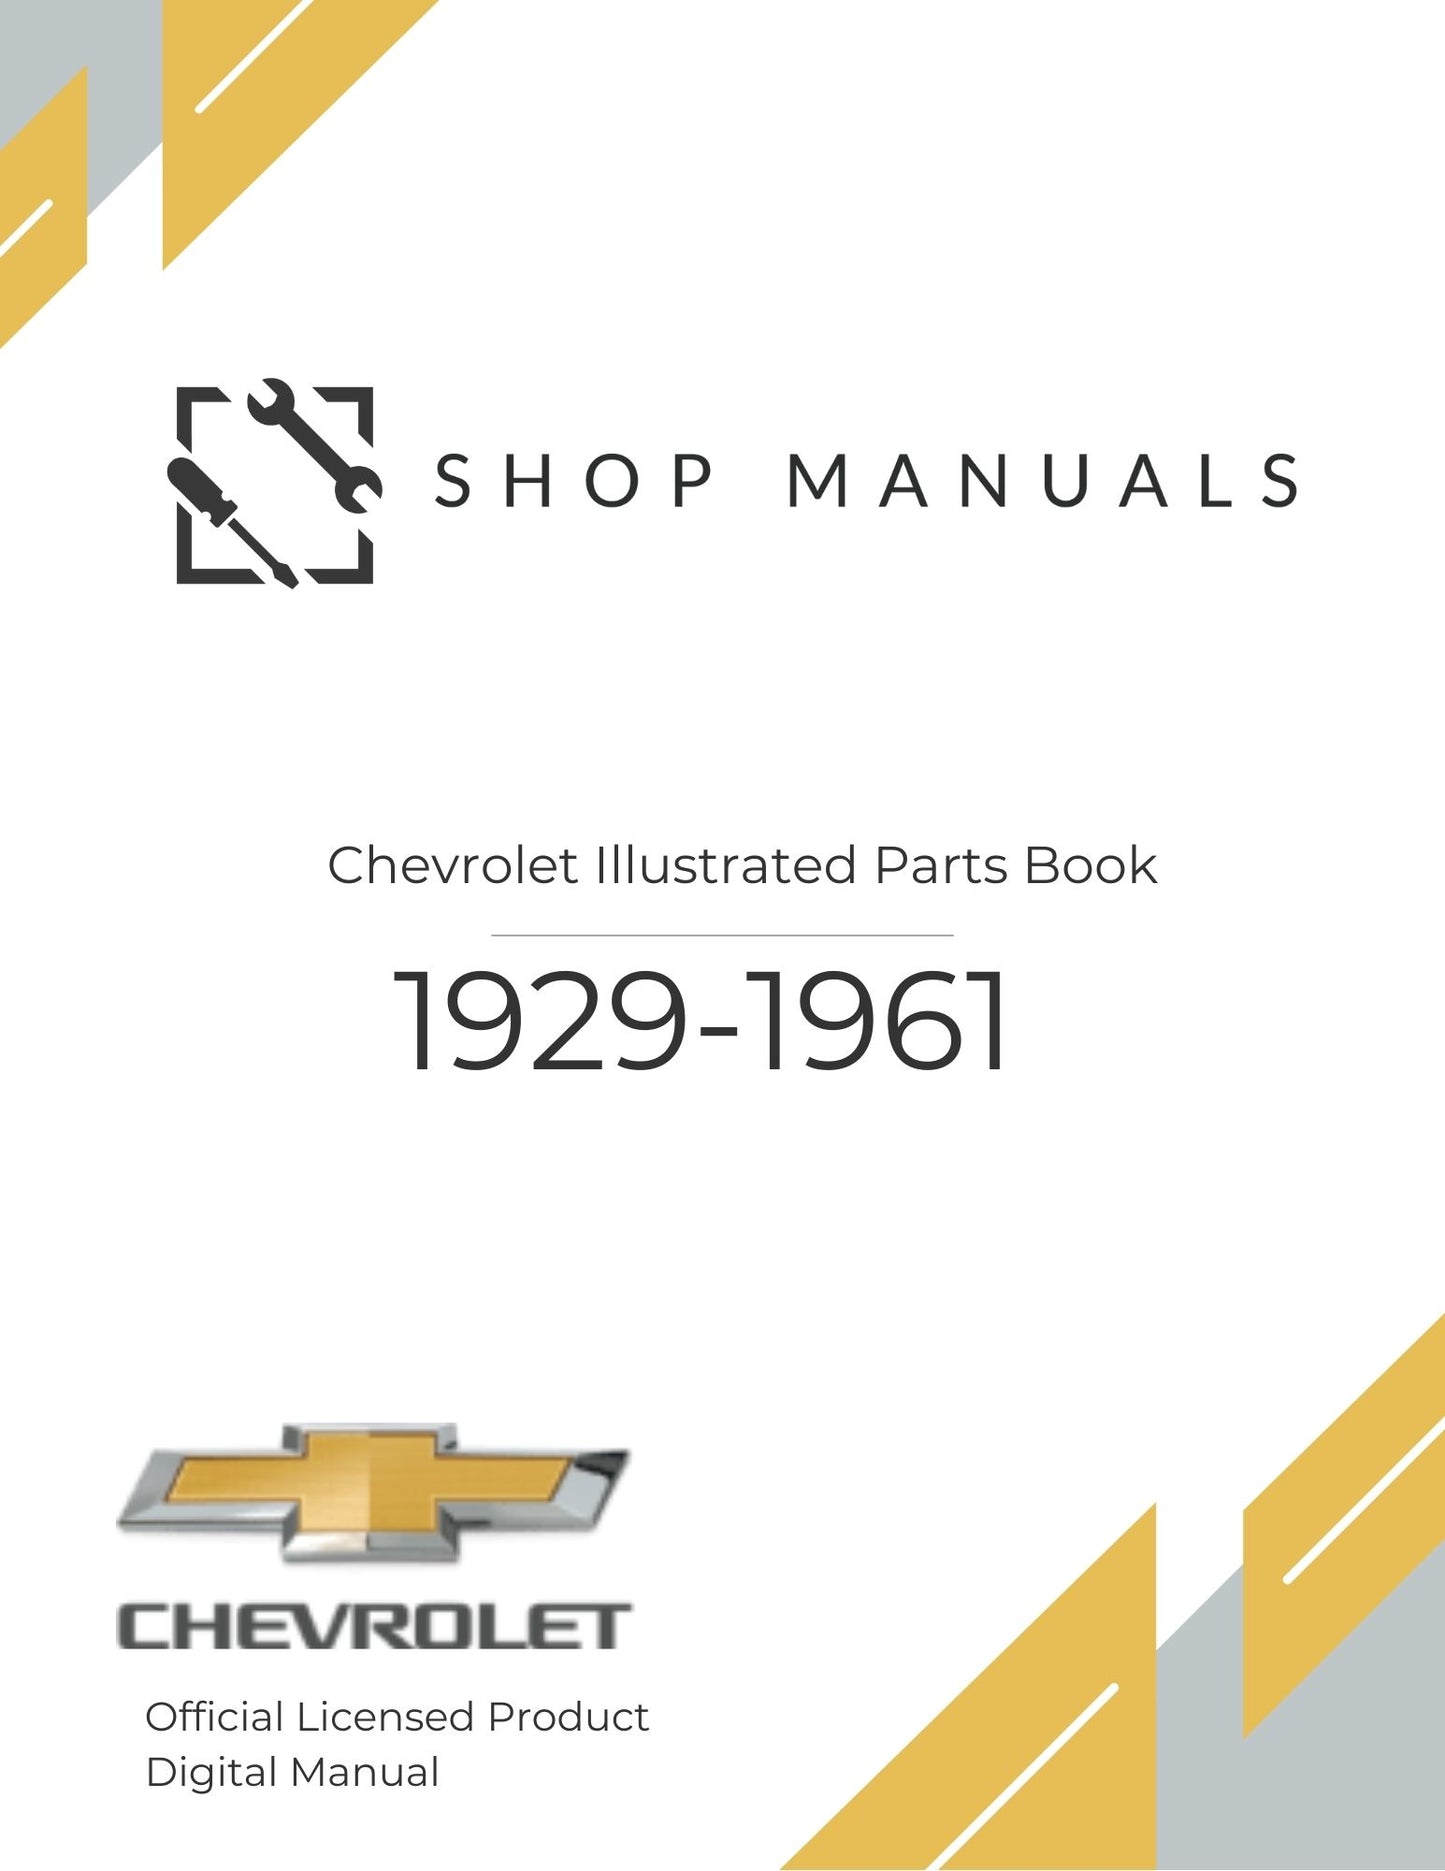 1929-1961 Chevrolet Illustrated Parts Book